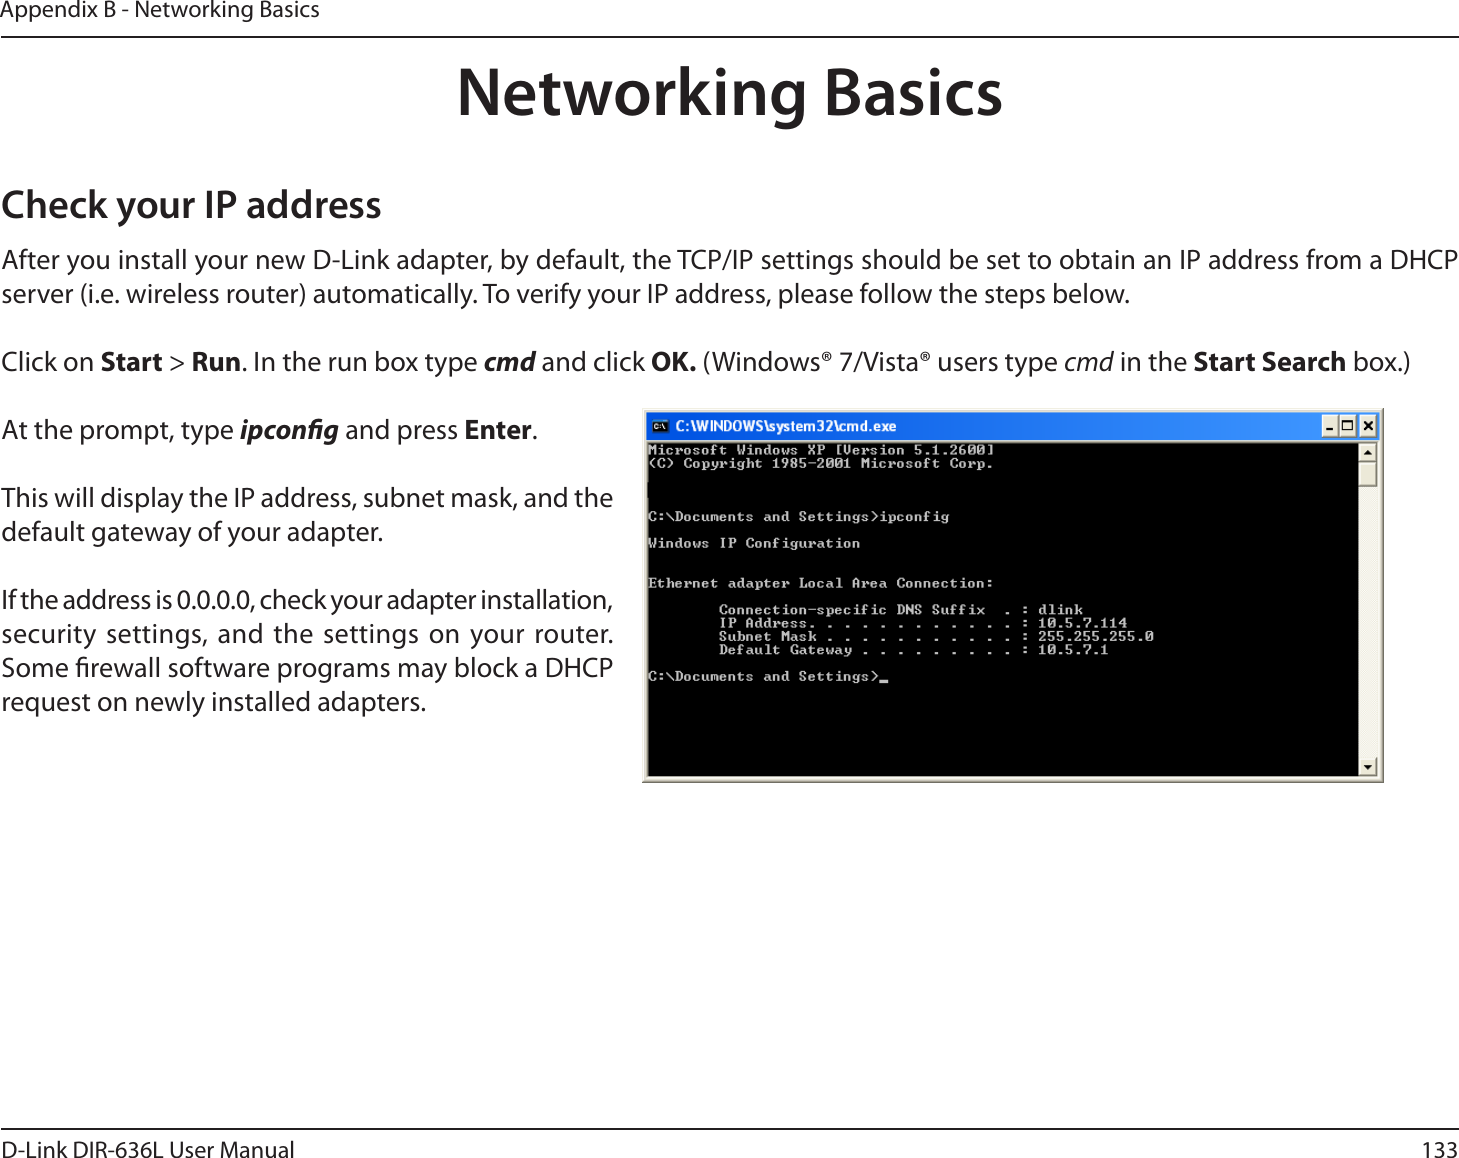 133D-Link DIR-636L User ManualAppendix B - Networking BasicsNetworking BasicsCheck your IP addressAfter you install your new D-Link adapter, by default, the TCP/IP settings should be set to obtain an IP address from a DHCP server (i.e. wireless router) automatically. To verify your IP address, please follow the steps below.Click on Start &gt; Run. In the run box type cmd and click OK. (Windows® 7/Vista® users type cmd in the Start Search box.)At the prompt, type ipcong and press Enter.This will display the IP address, subnet mask, and the default gateway of your adapter.If the address is 0.0.0.0, check your adapter installation, security settings, and the settings on your router. Some rewall software programs may block a DHCP request on newly installed adapters. 